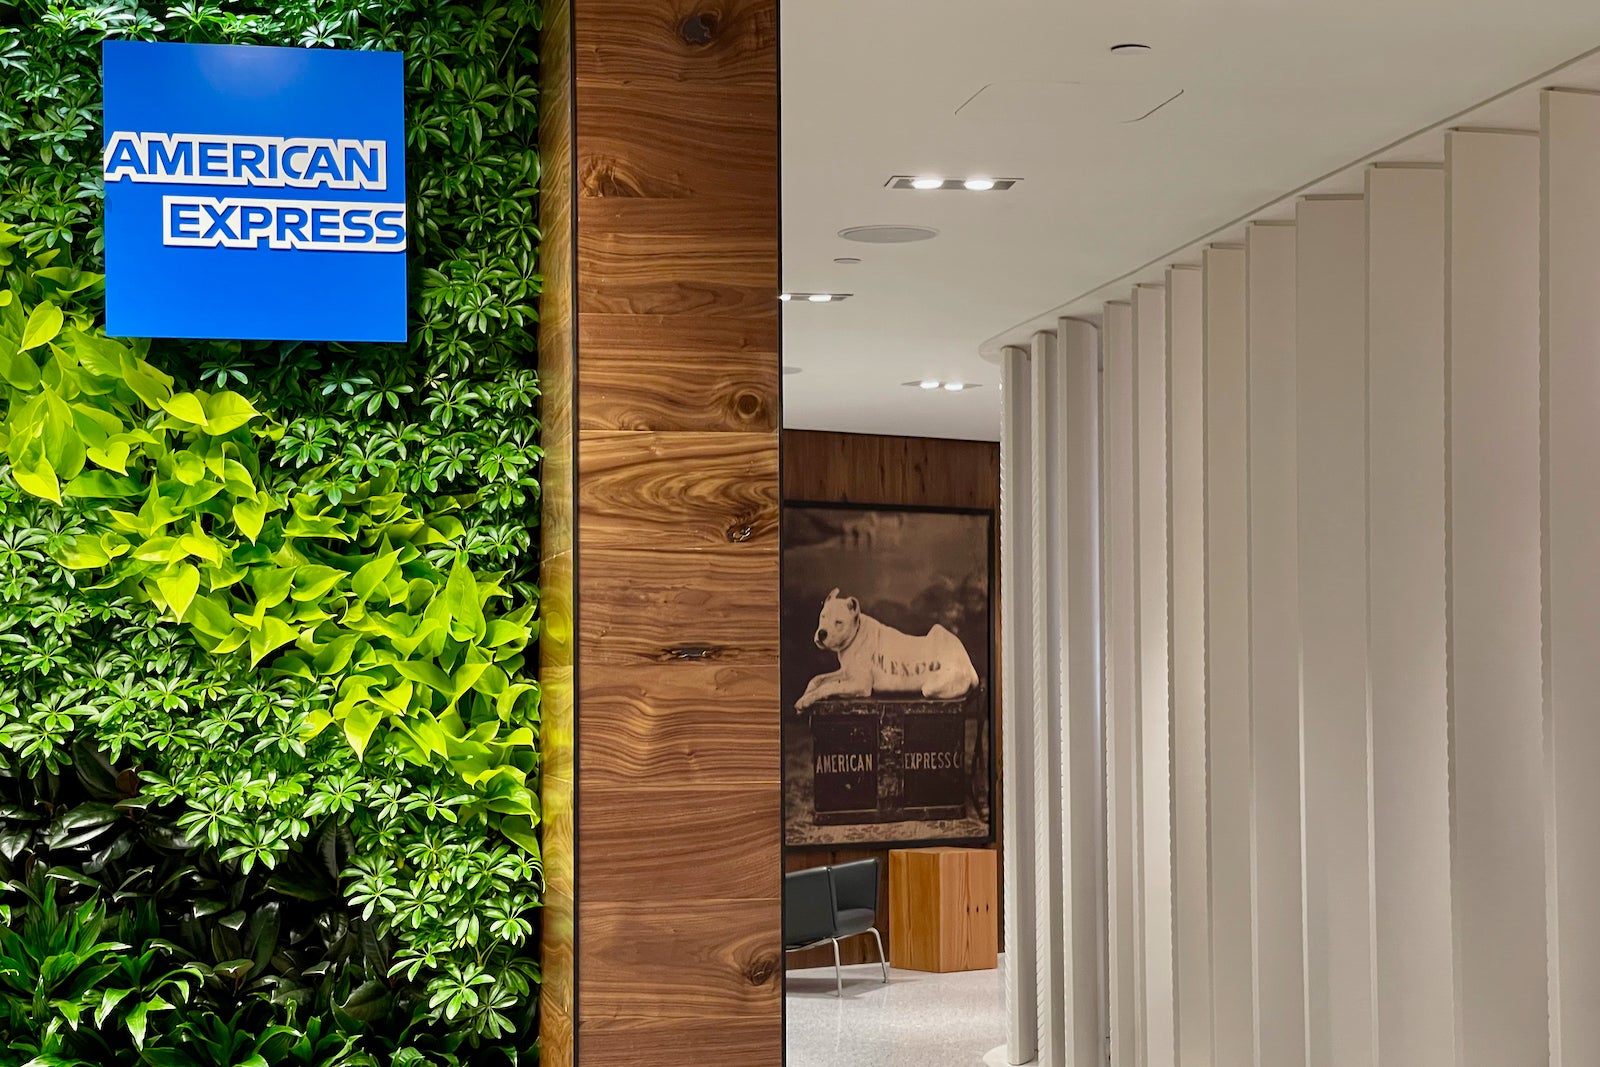 the entrance to an American Express lounge